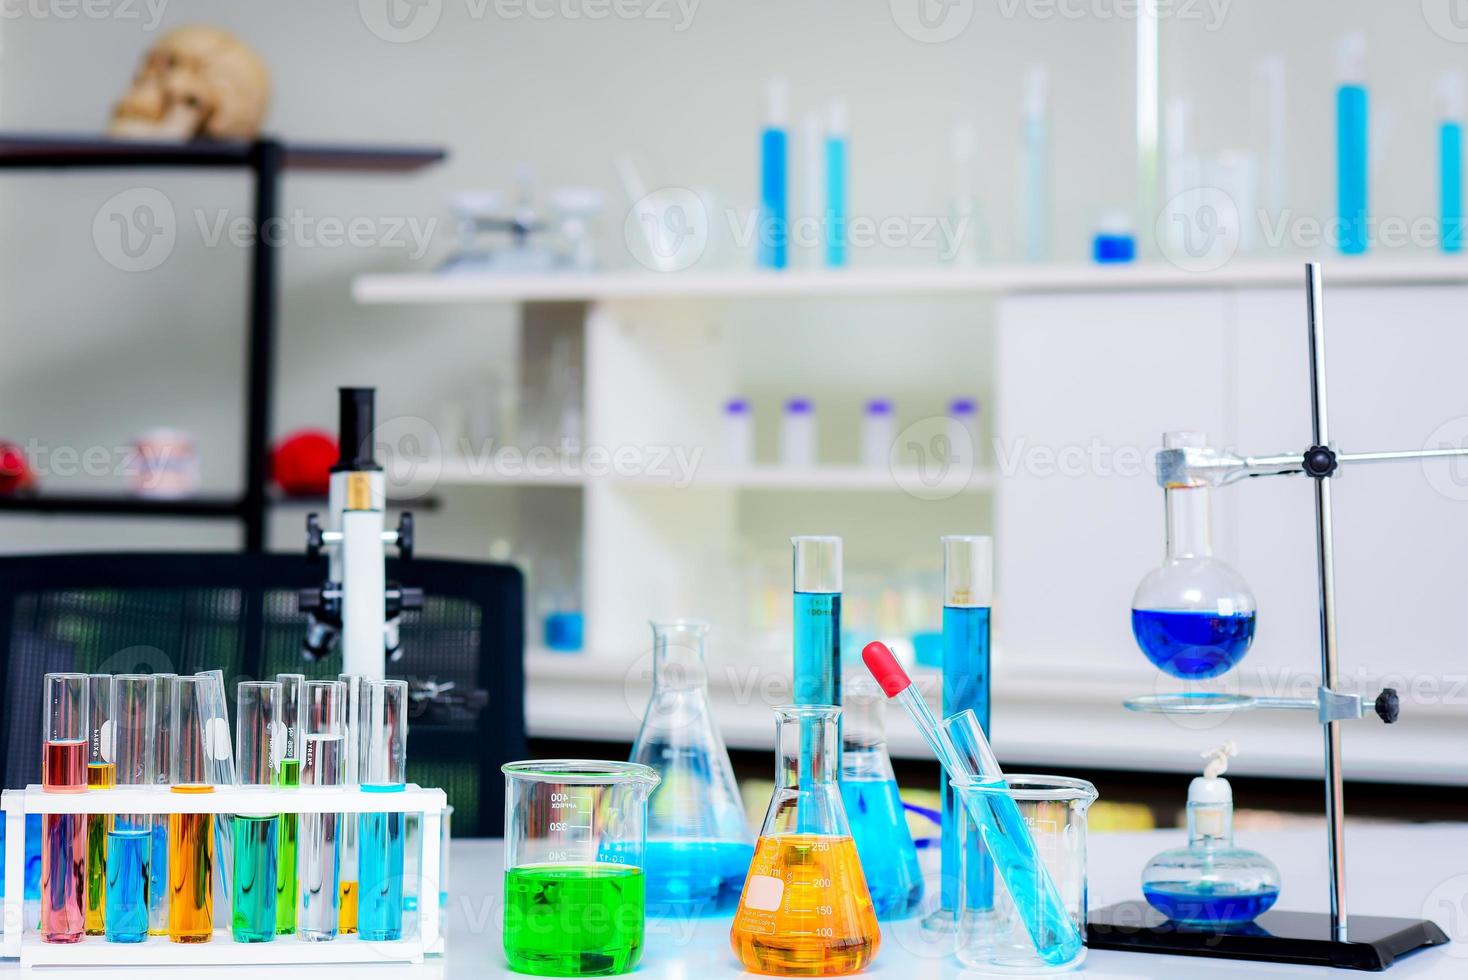 Glassware equipment in chemical laboratories lined up on the table Example tubes, flask,cylinder, burner, pipette, beaker, dropper, microscope photo